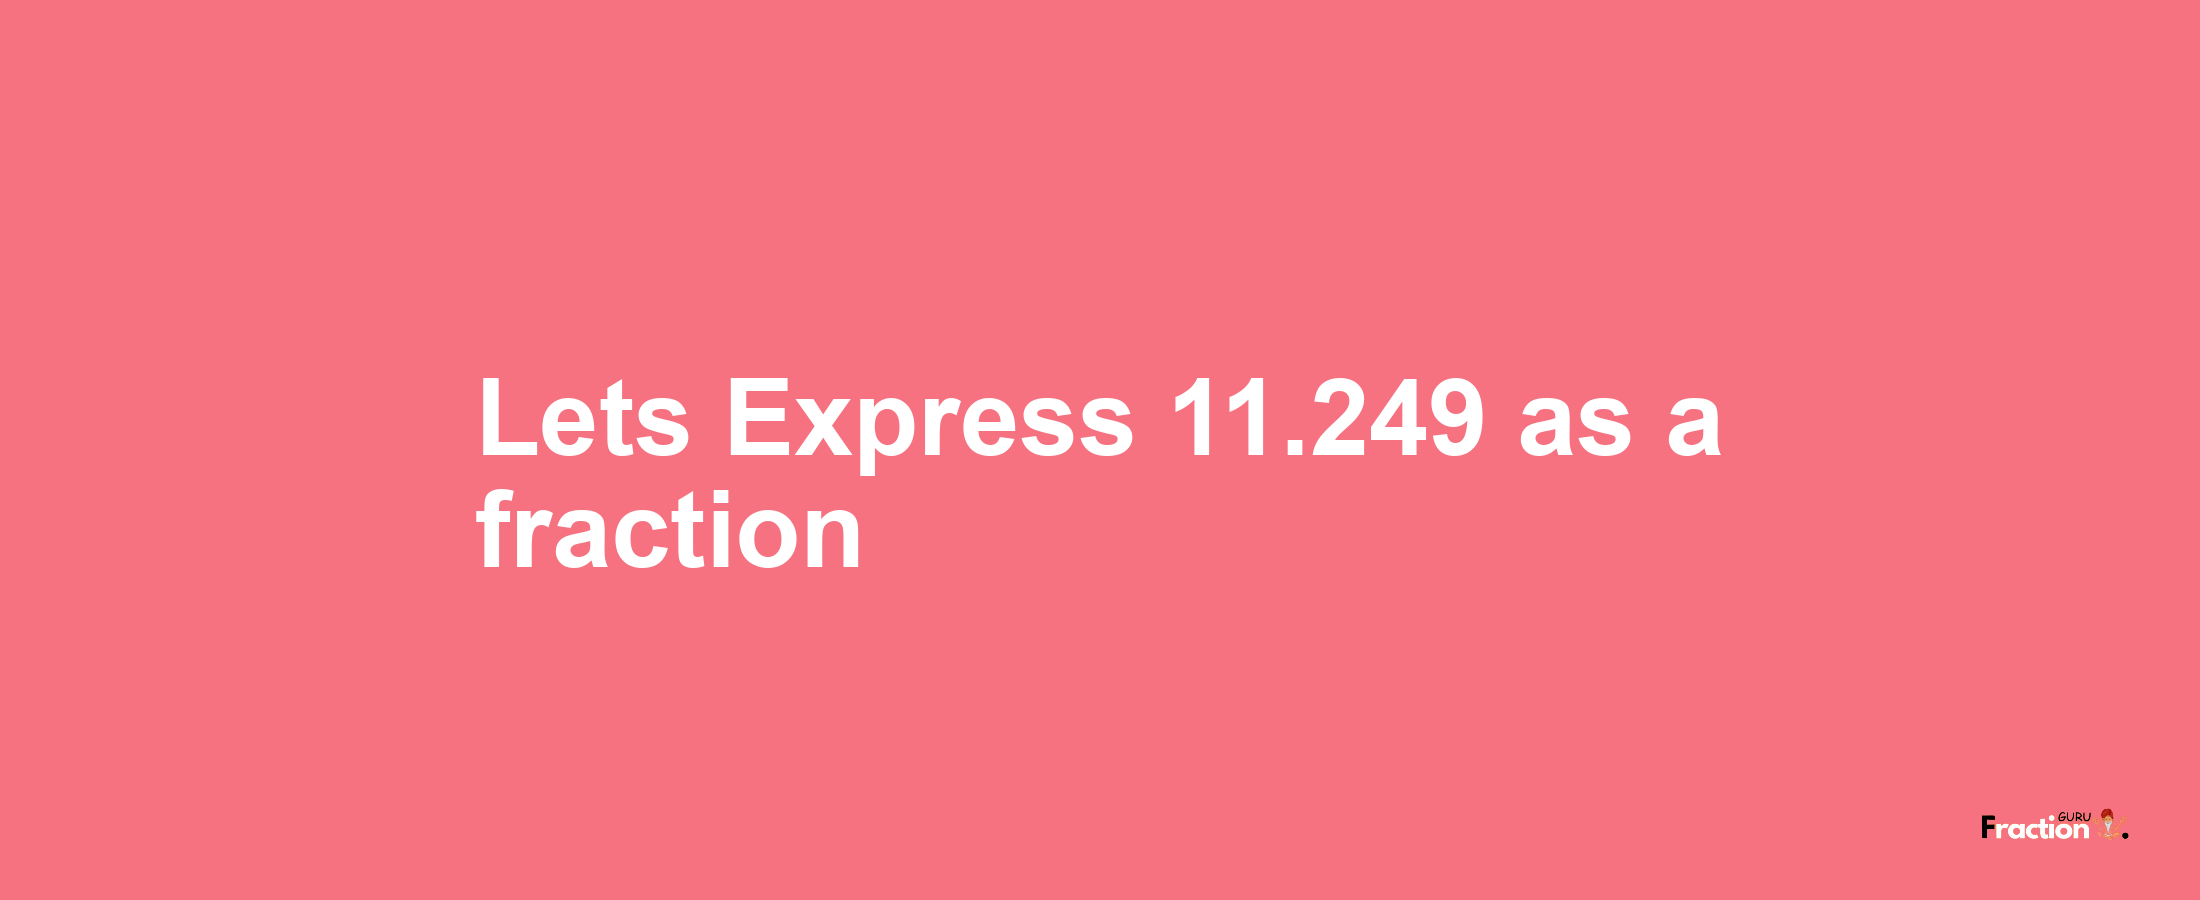 Lets Express 11.249 as afraction